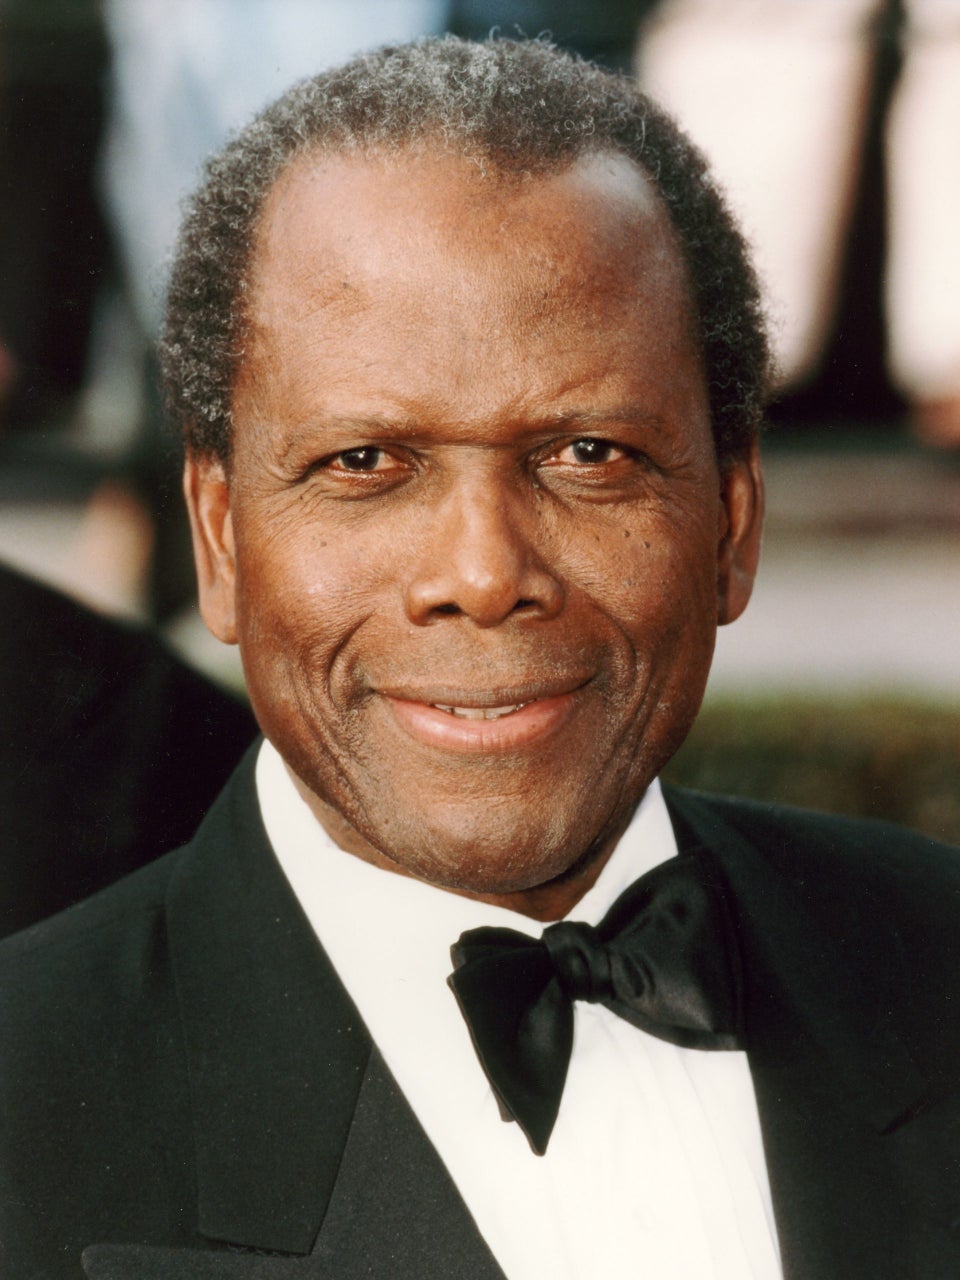 Arizona State University Names New American Film School After Sidney Poitier